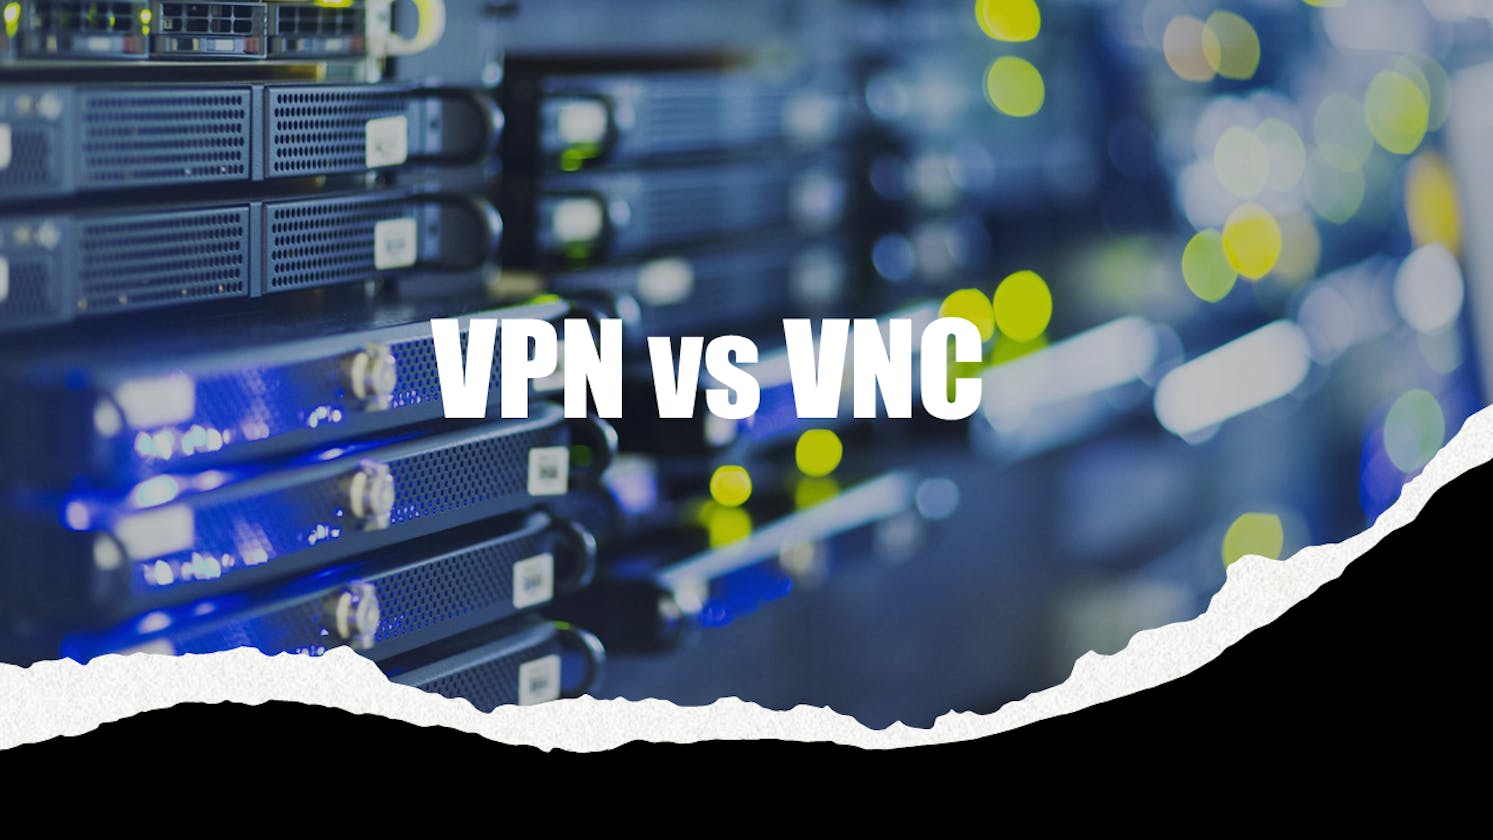 VPN vs. VNC - Which One is Safer & Faster?